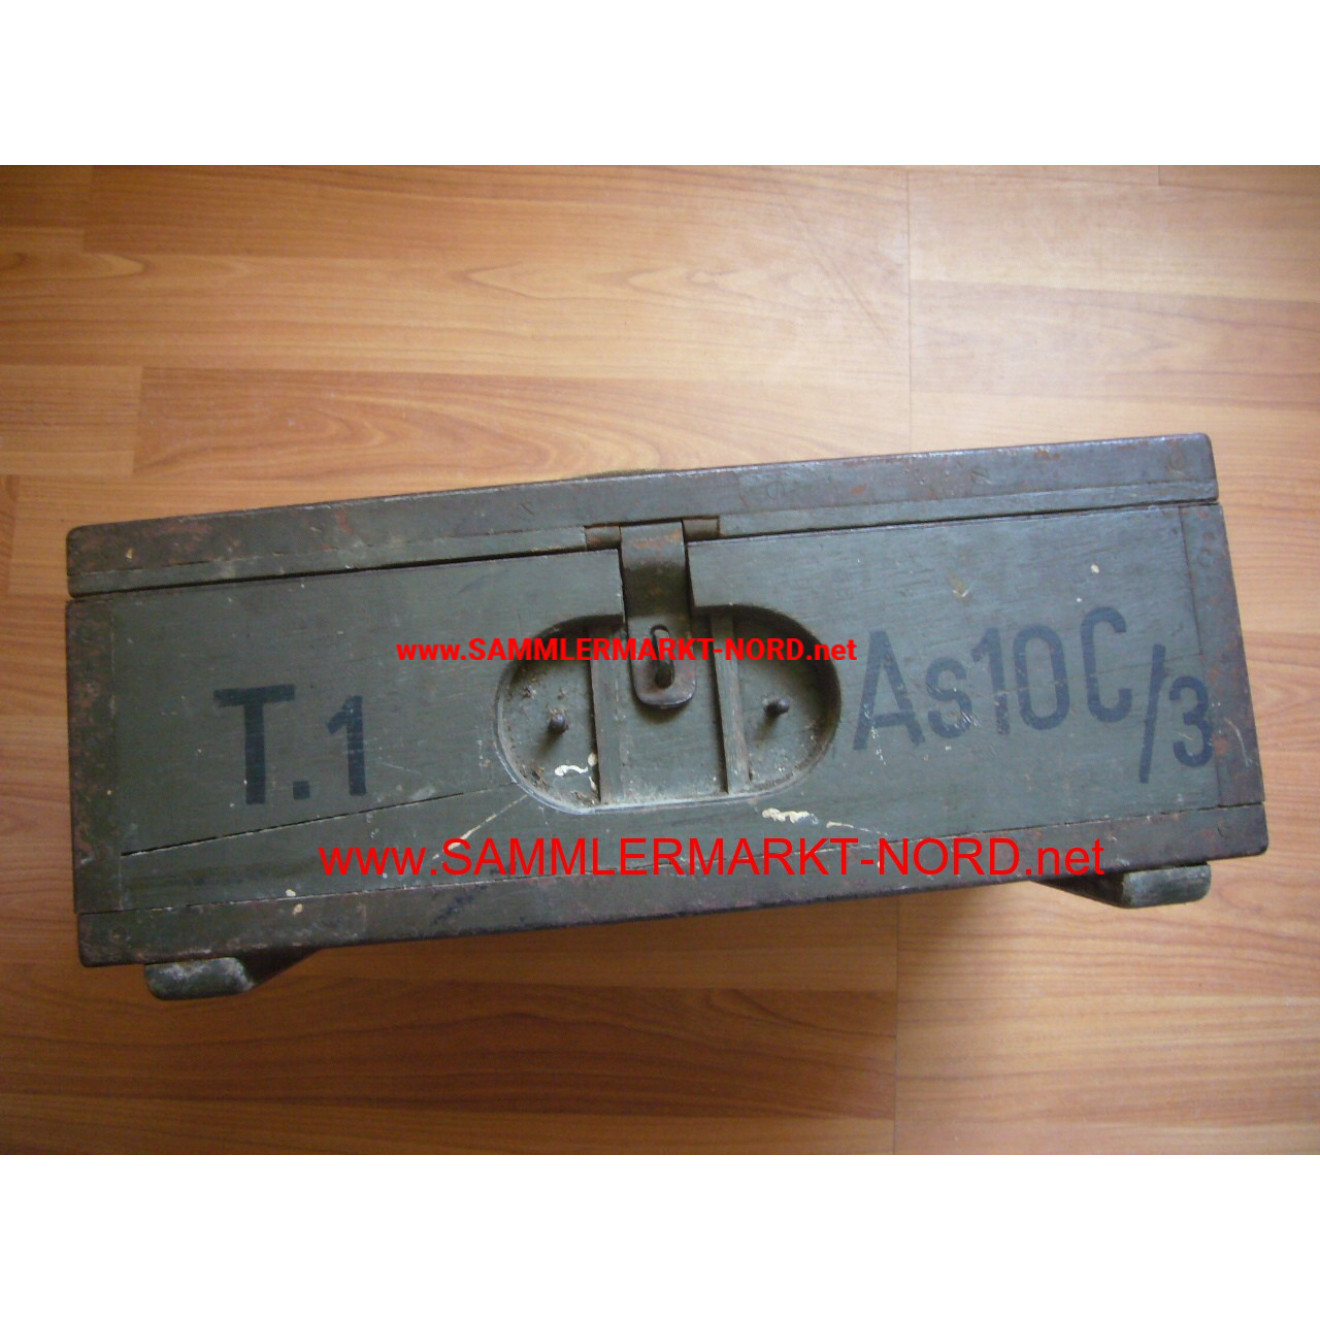 Wehrmacht - transport box, probably for technical equipment